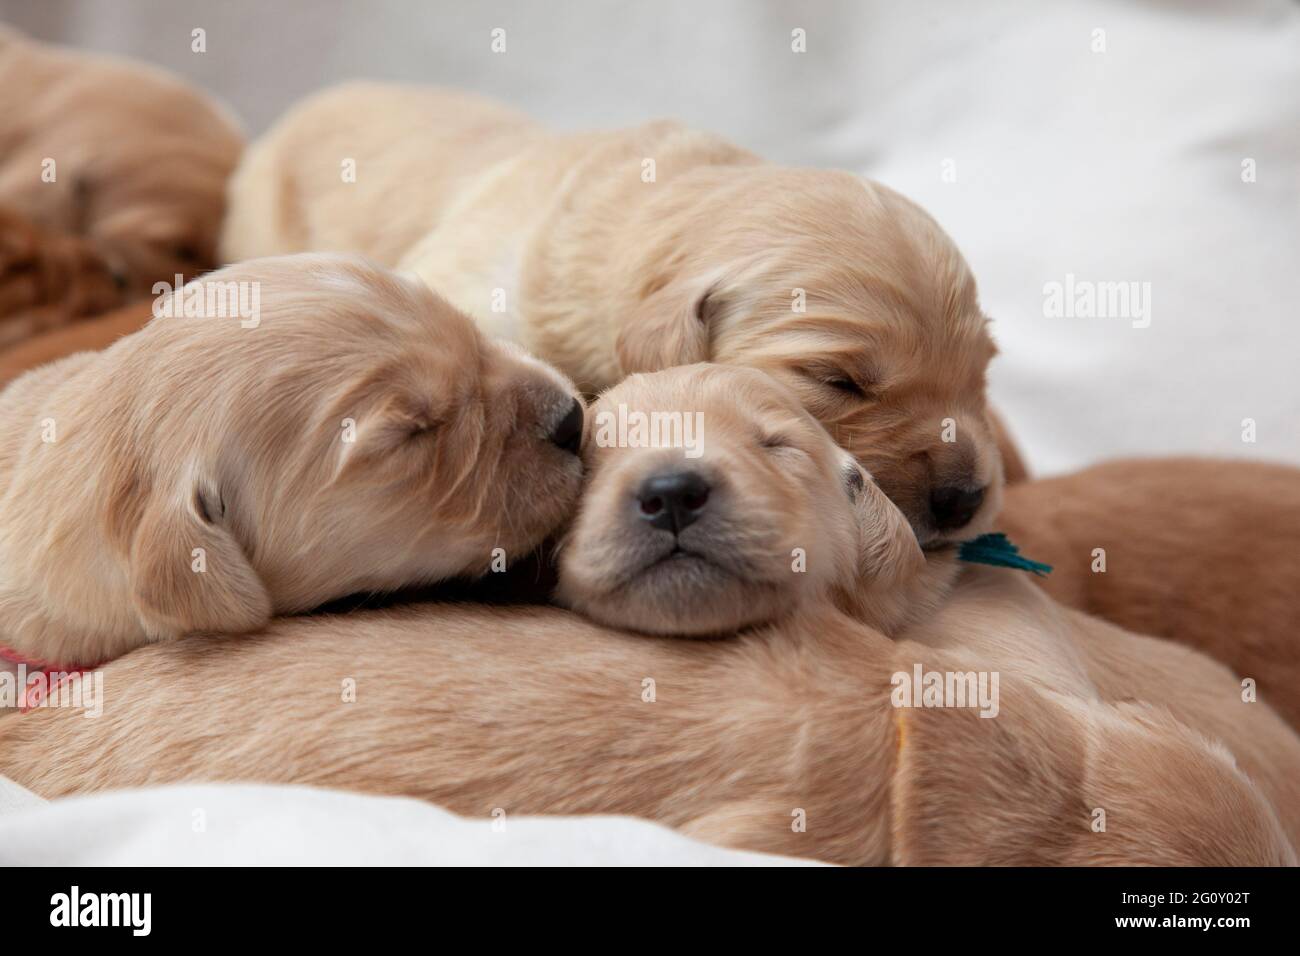 one new golden puppy gives a sleeping kiss to its sibling Stock Photo